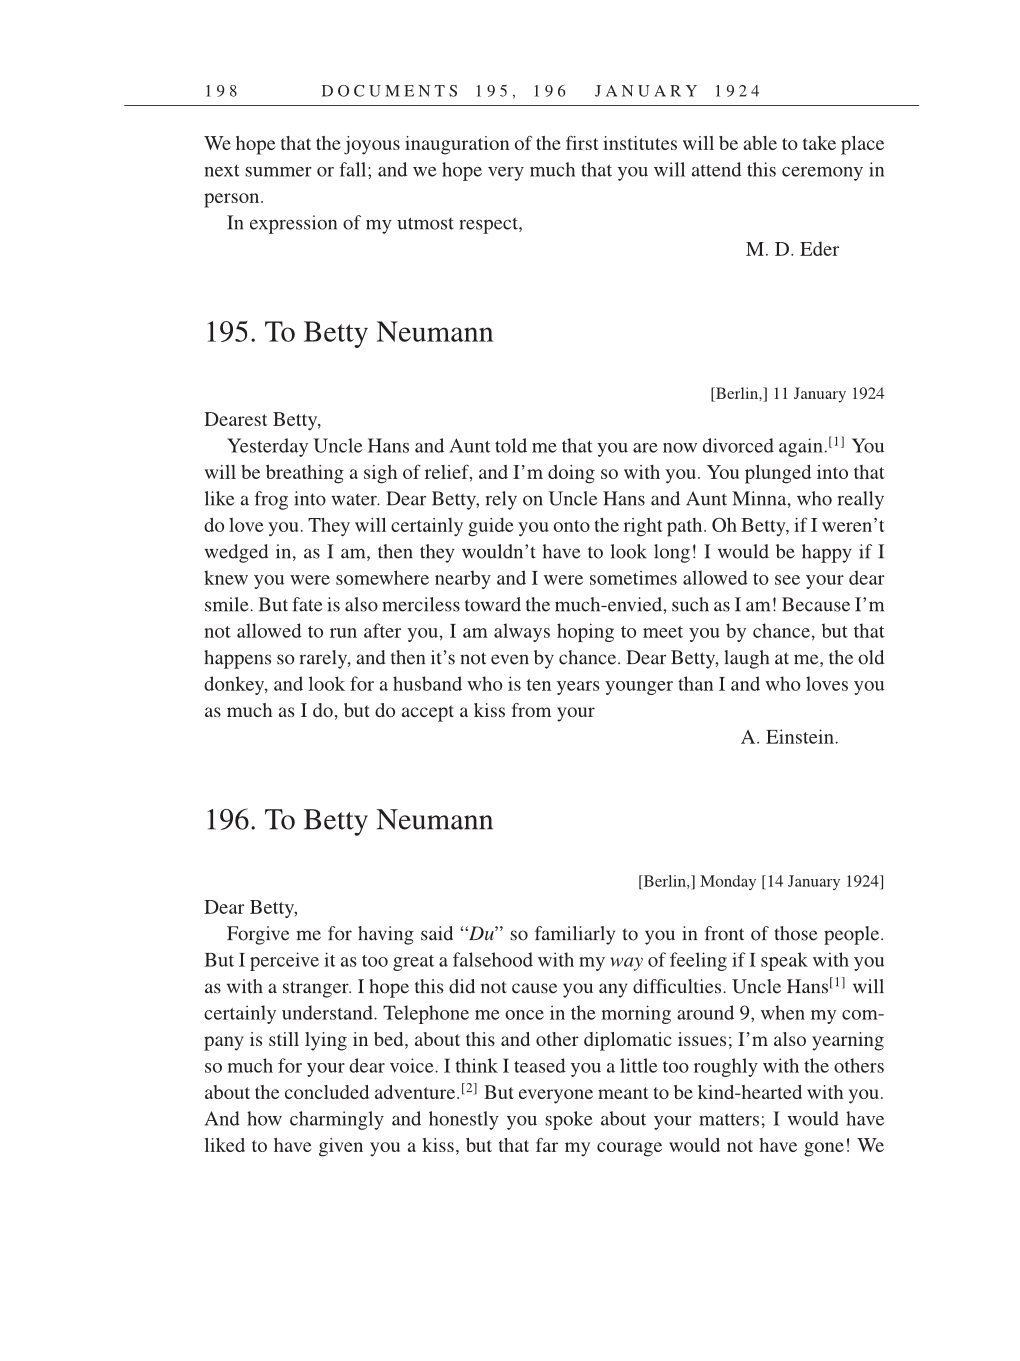 Volume 14: The Berlin Years: Writings & Correspondence, April 1923-May 1925 (English Translation Supplement) page 198